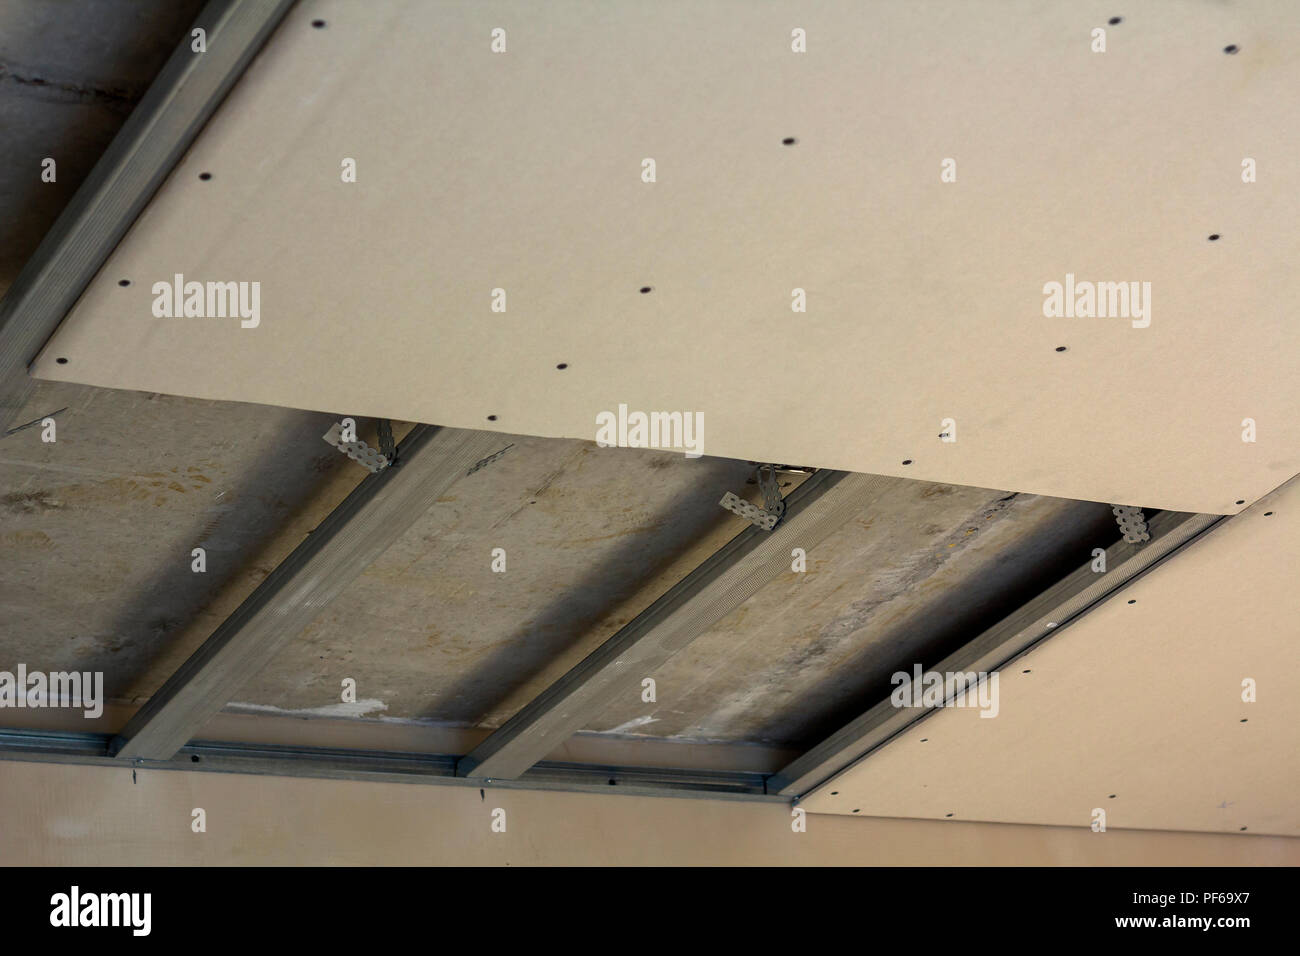 Close Up Detail Of Room Under Construction Suspended Ceiling From Drywall Fixed To Metal Frame With Screws Renovation Insulation Comfort Professi Stock Photo Alamy